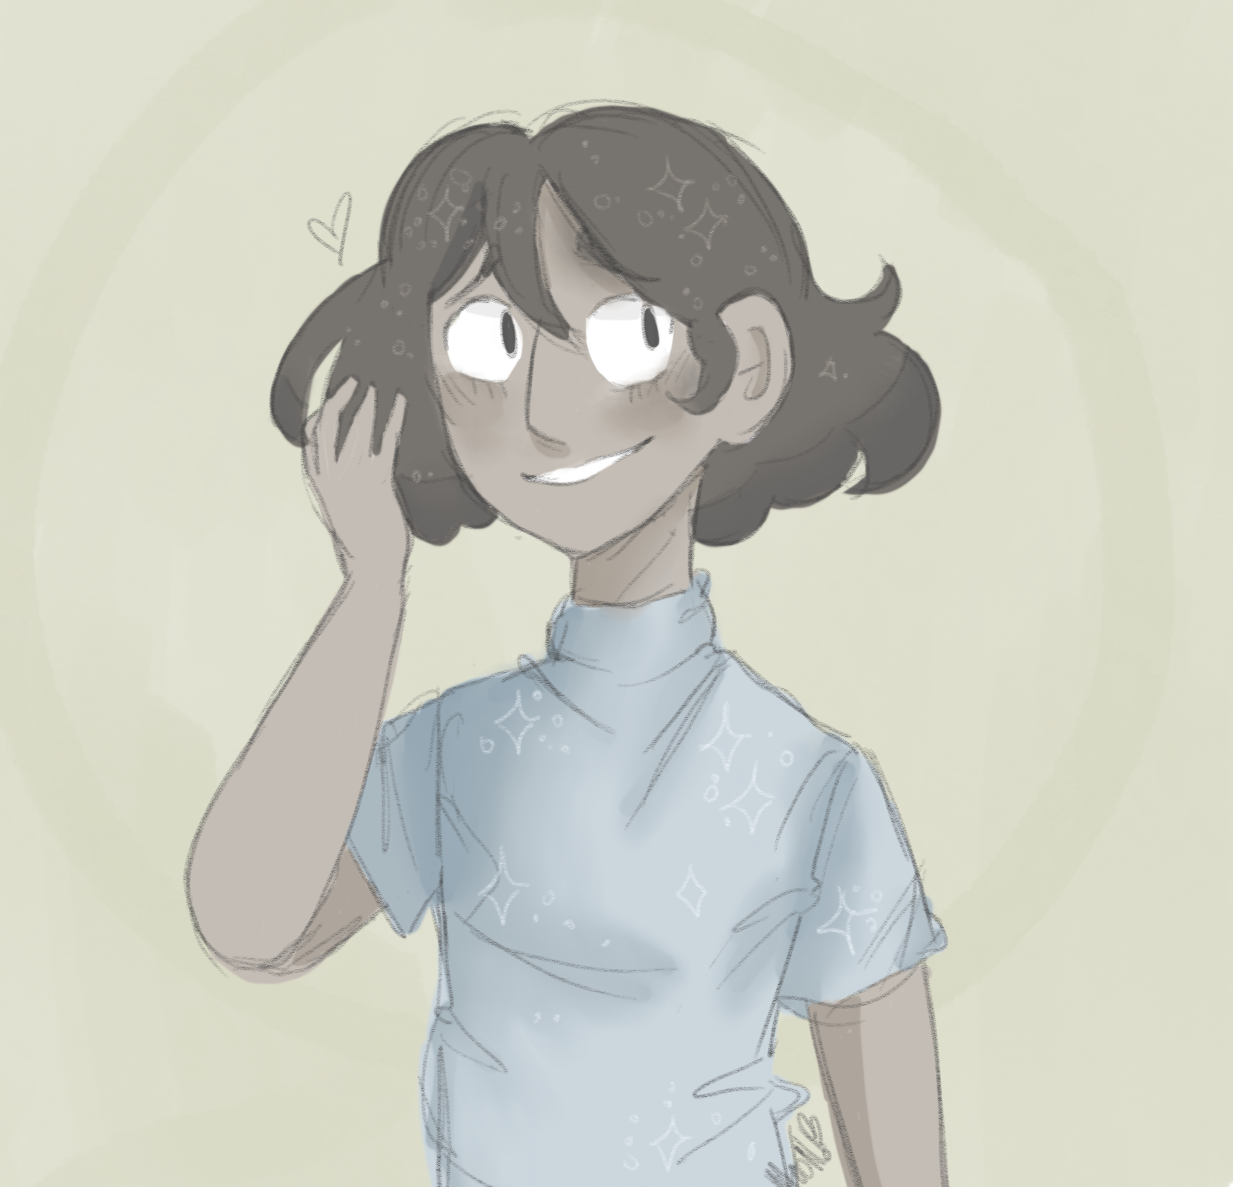 connie was the only thing that mattered to me the entire time tbh